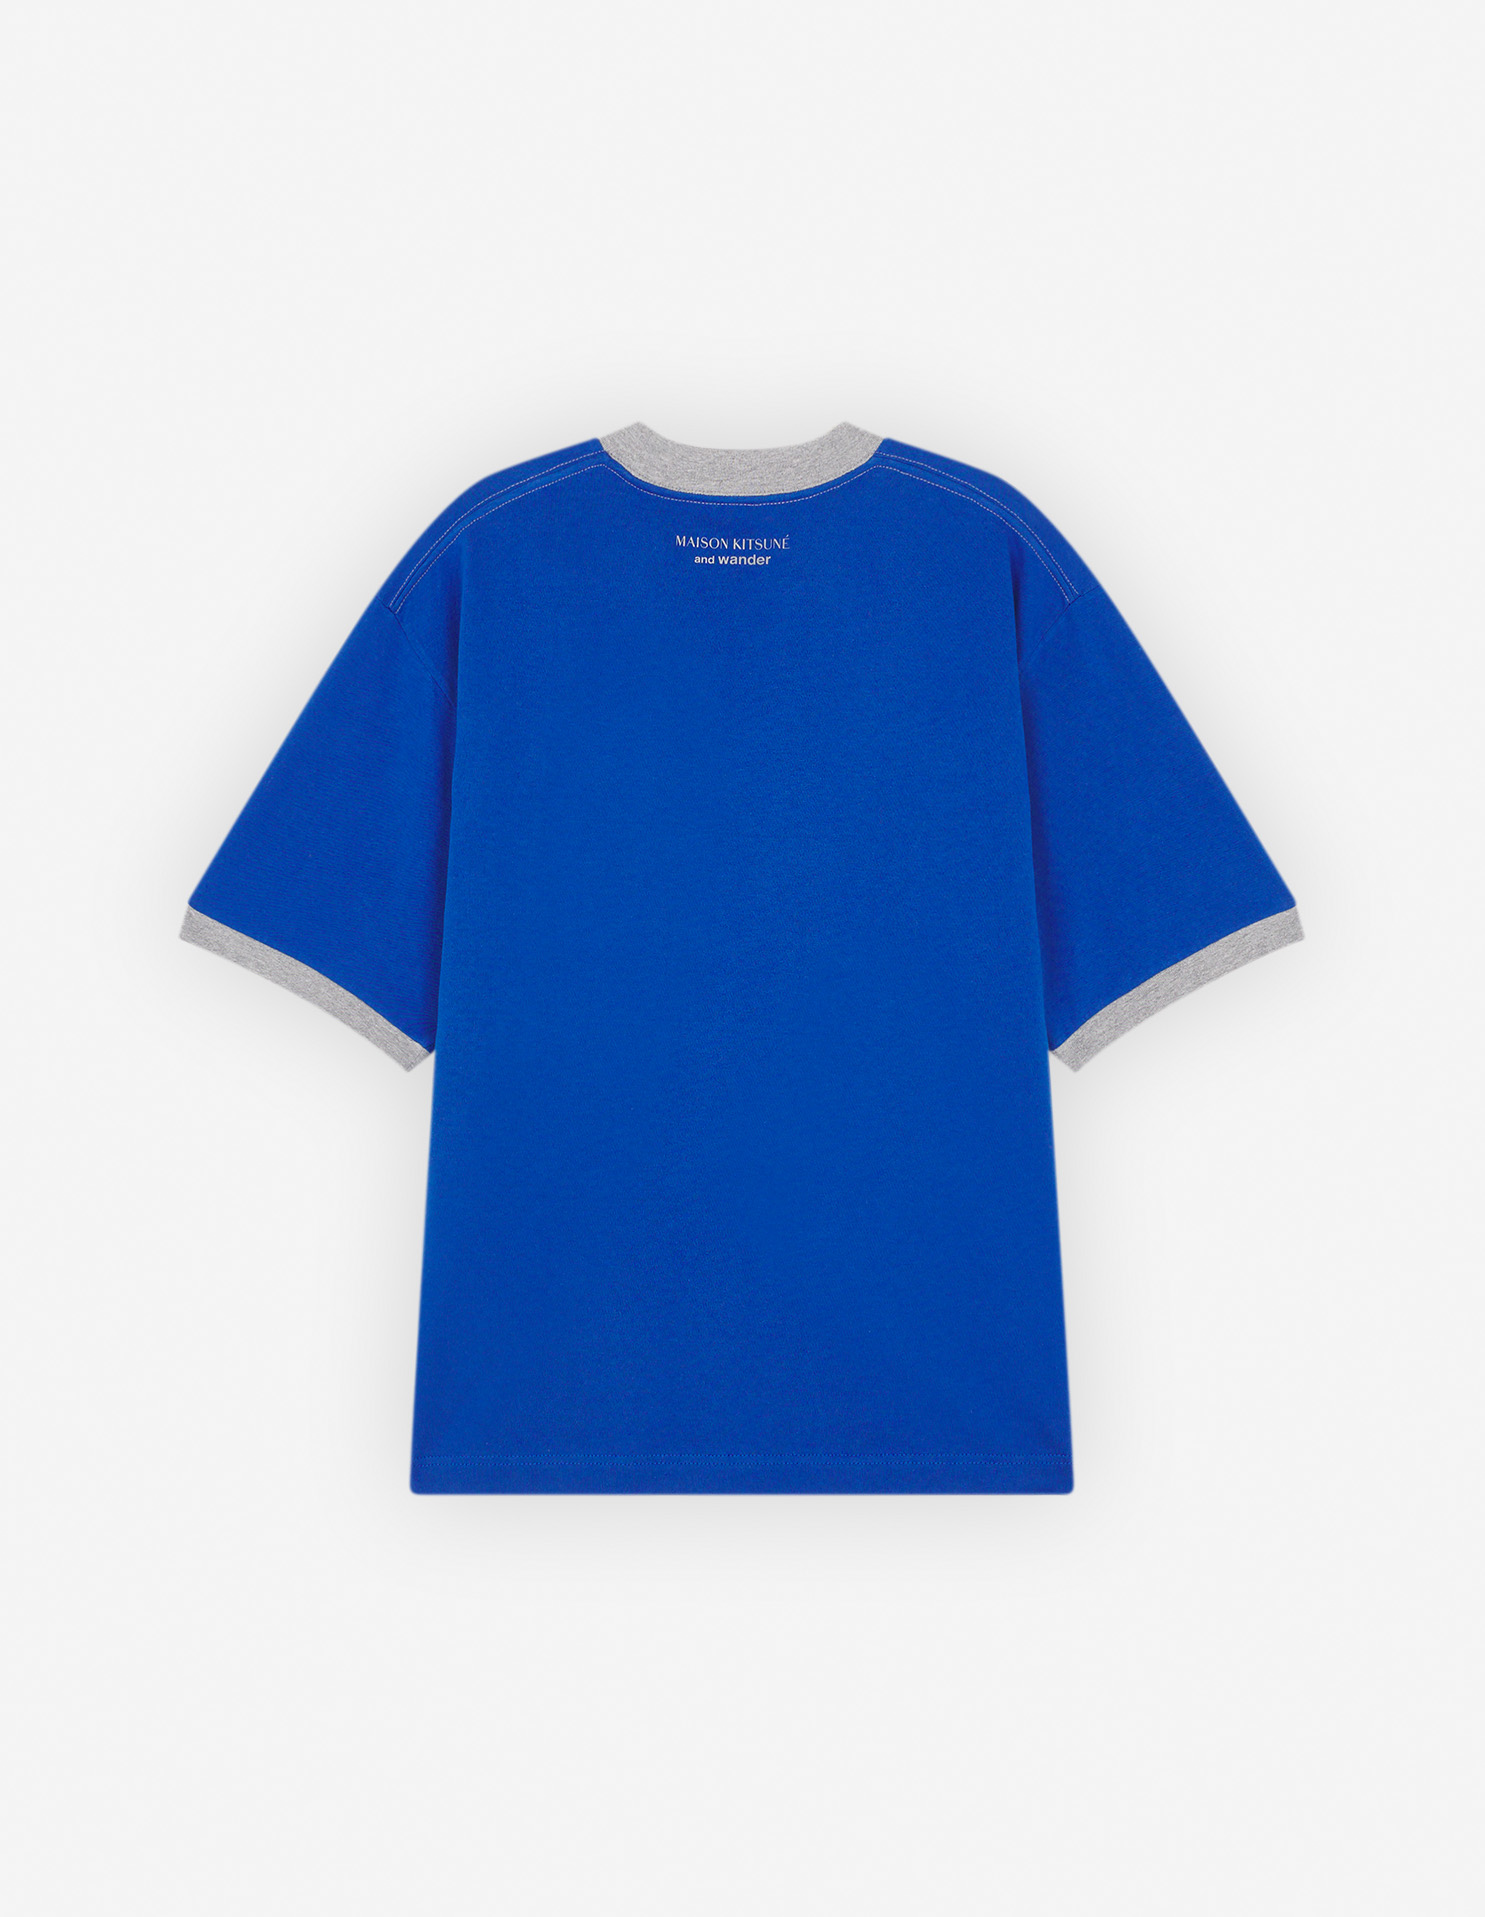 MK X AND WANDER RINGER cotton T-